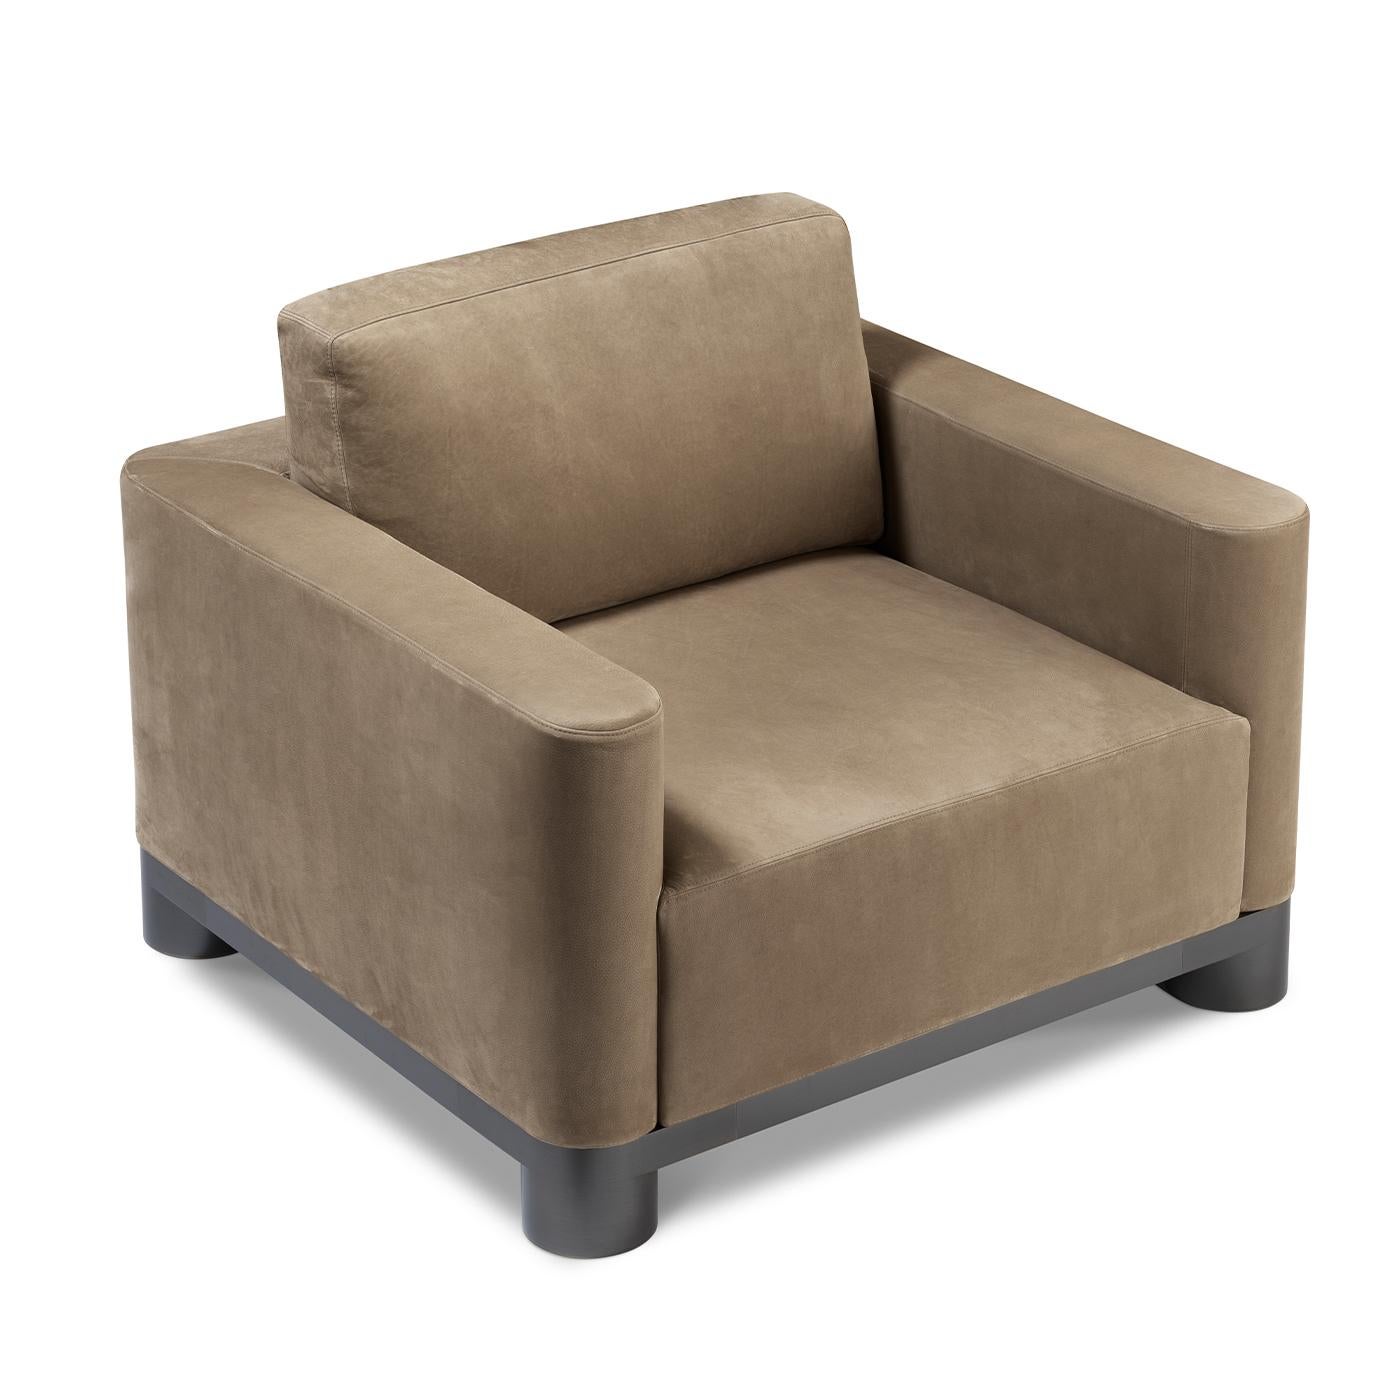 This exquisite lounge chair will create a suffused and charming effect in both a modern or classic living room or contract area, especially when combined to other designs form the Bold Collection of tables and seatings. Entirely upholstered of fine